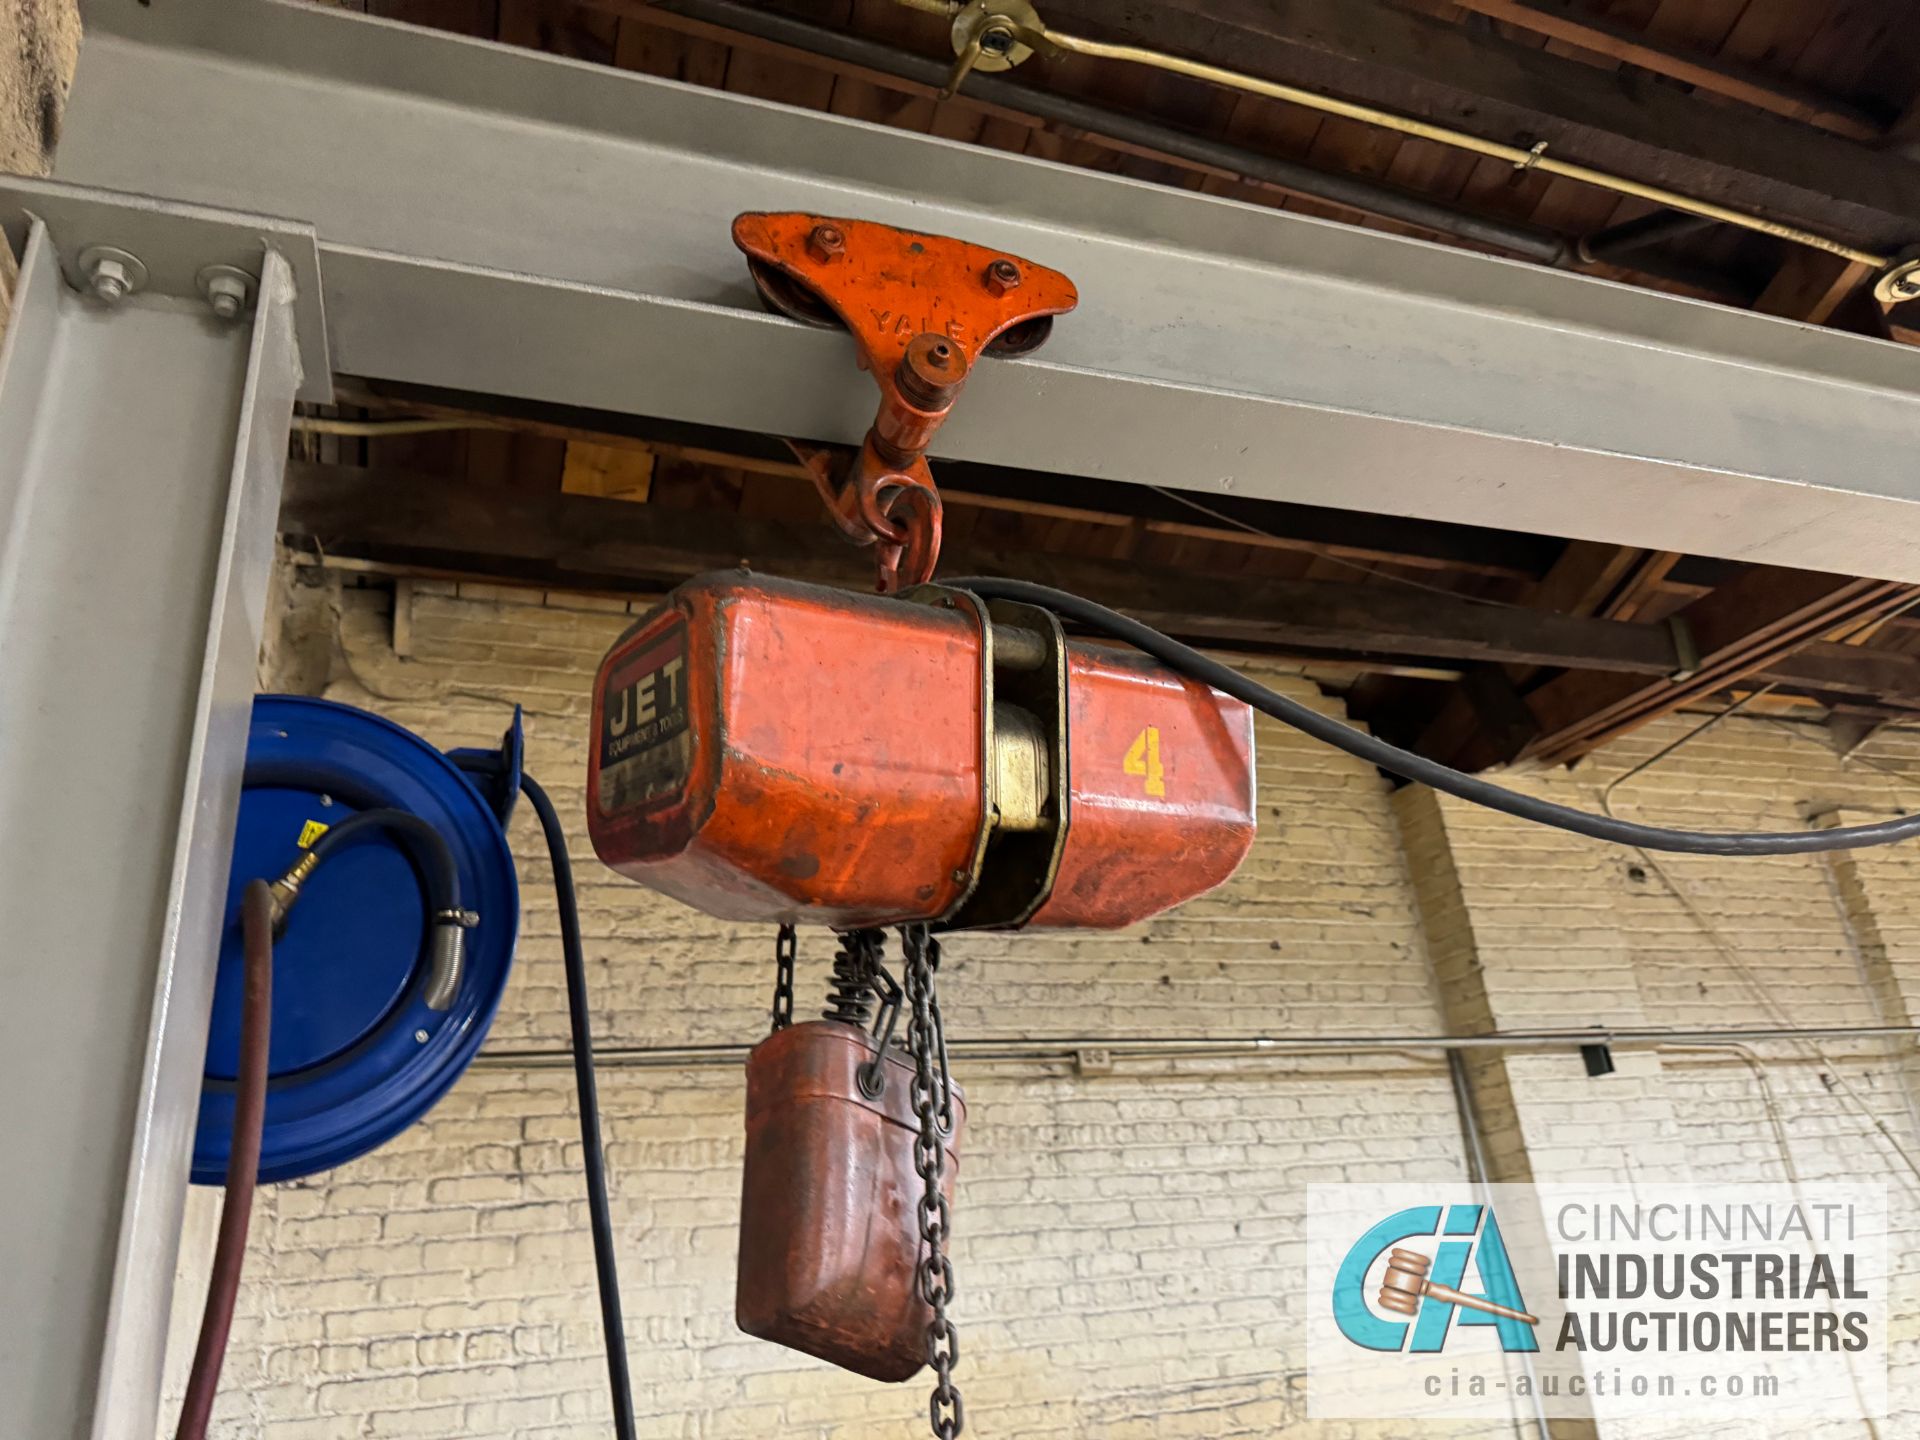 Free Standing 1 Crane w/ (2) 1 Ton Electric Hoists 6"x 6" Beams, 224" Span, 112" Beam Height - Image 4 of 5